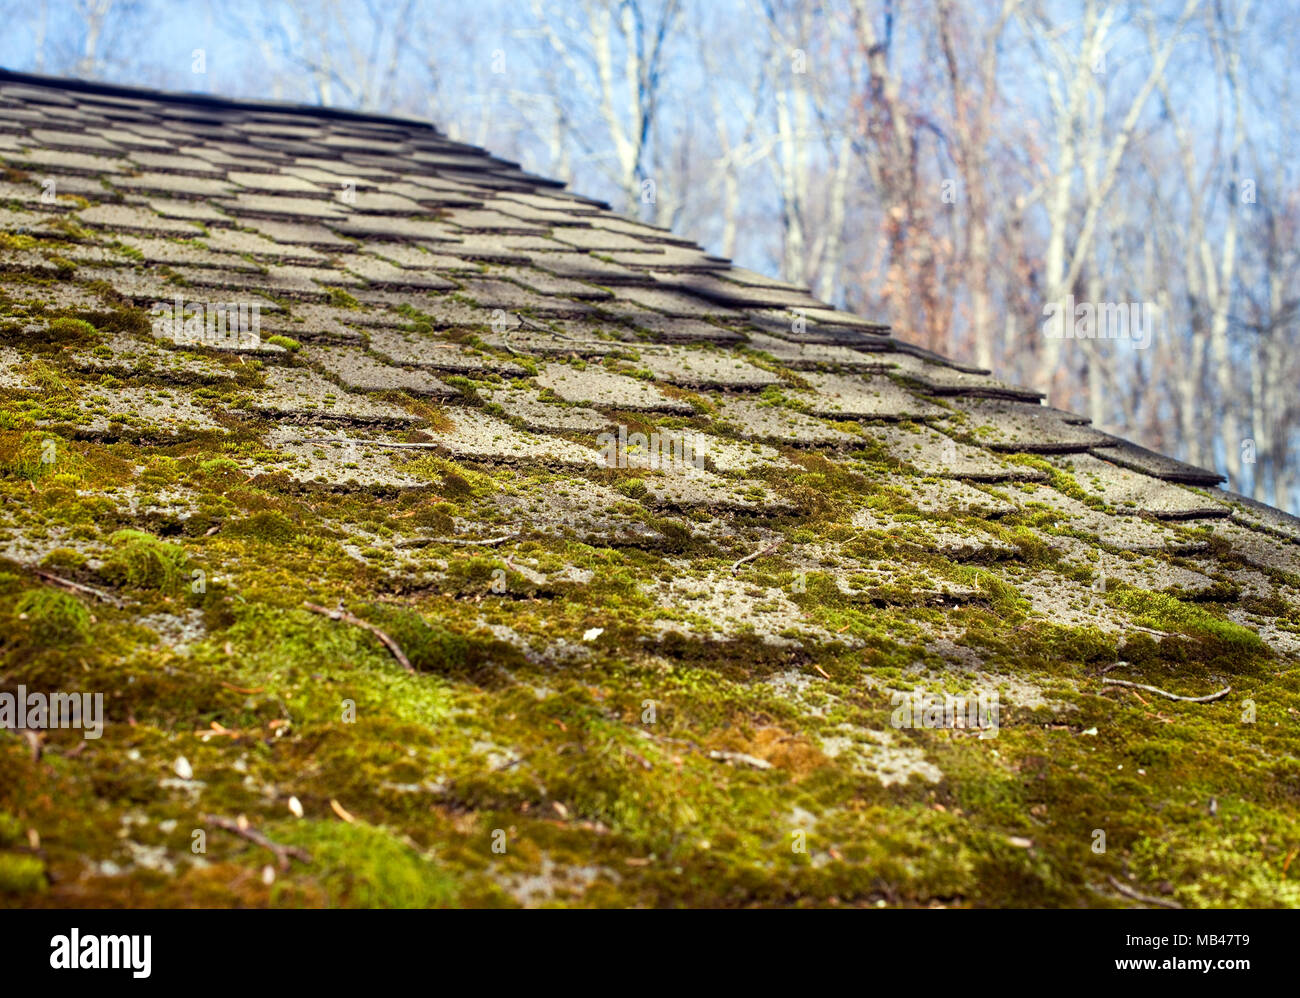 leaves in house gutter with moss growing on shingle roof Stock Photo